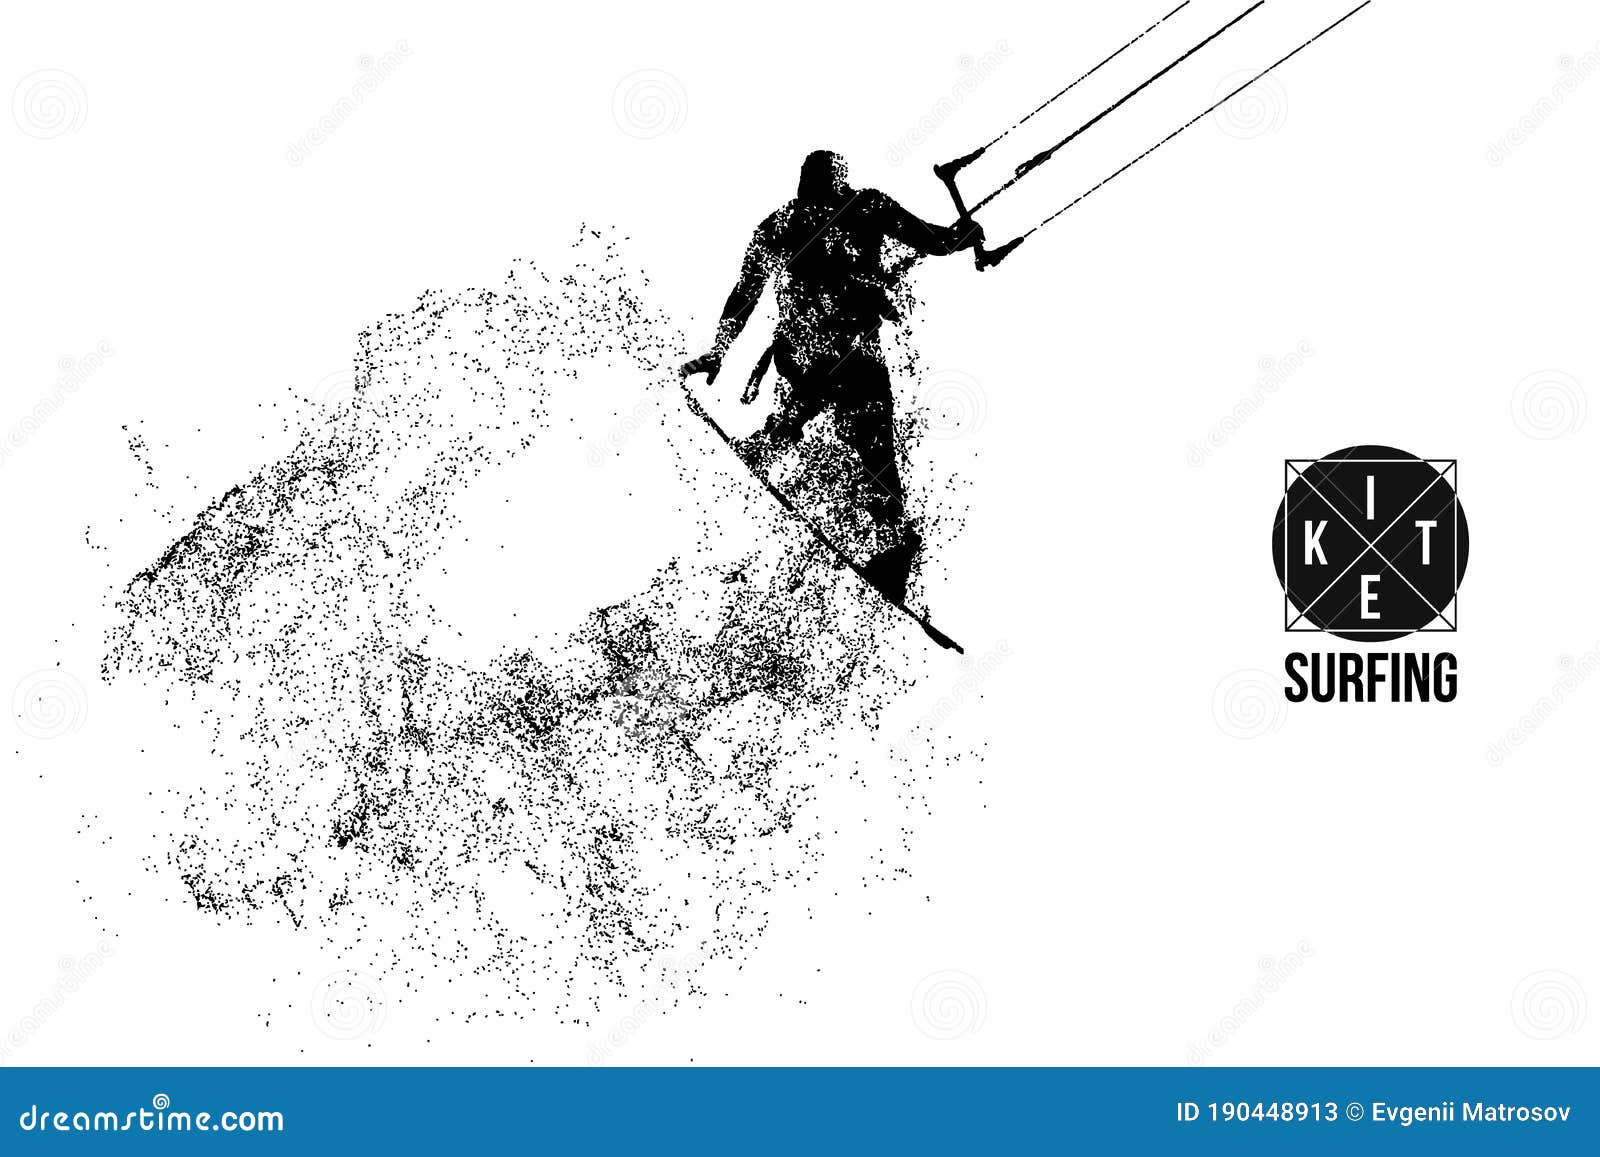 kitesurfing and kiteboarding. silhouette of a kitesurfer. man in a jump performs a trick. big air competition. 